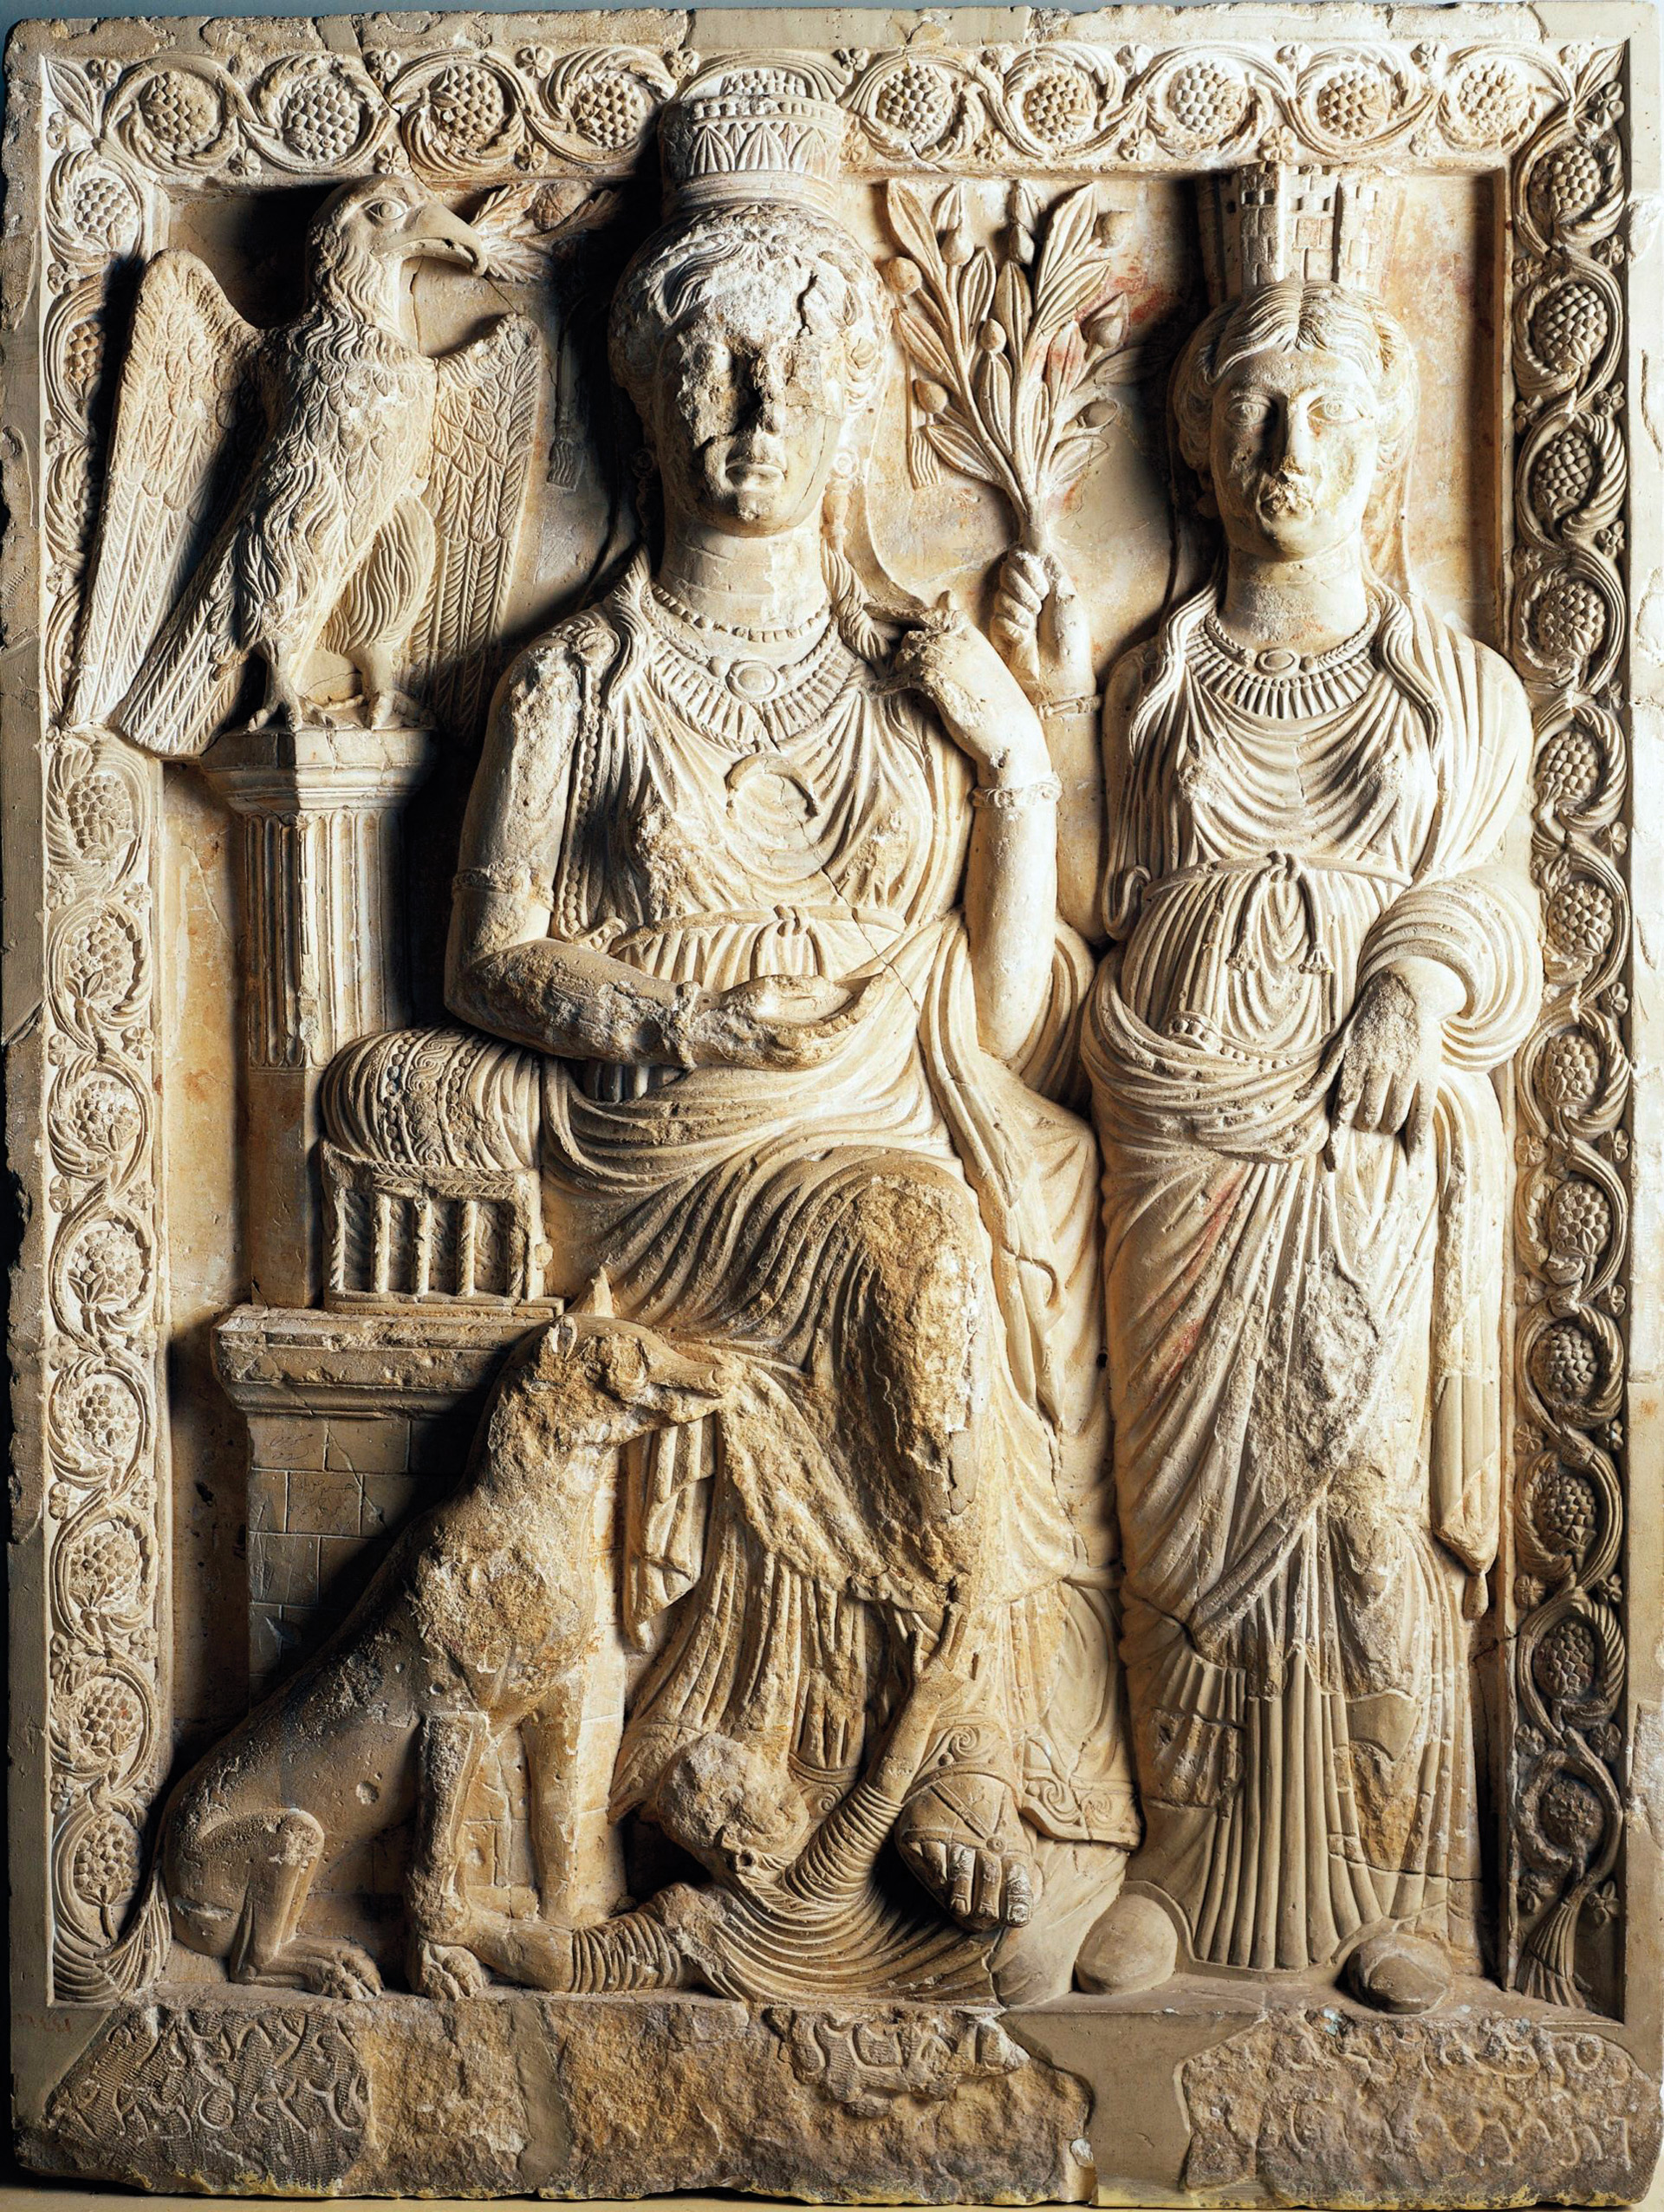 This relief dating from the 3rd century is believed to depict the likeness of Queen Zenobia and her maid.